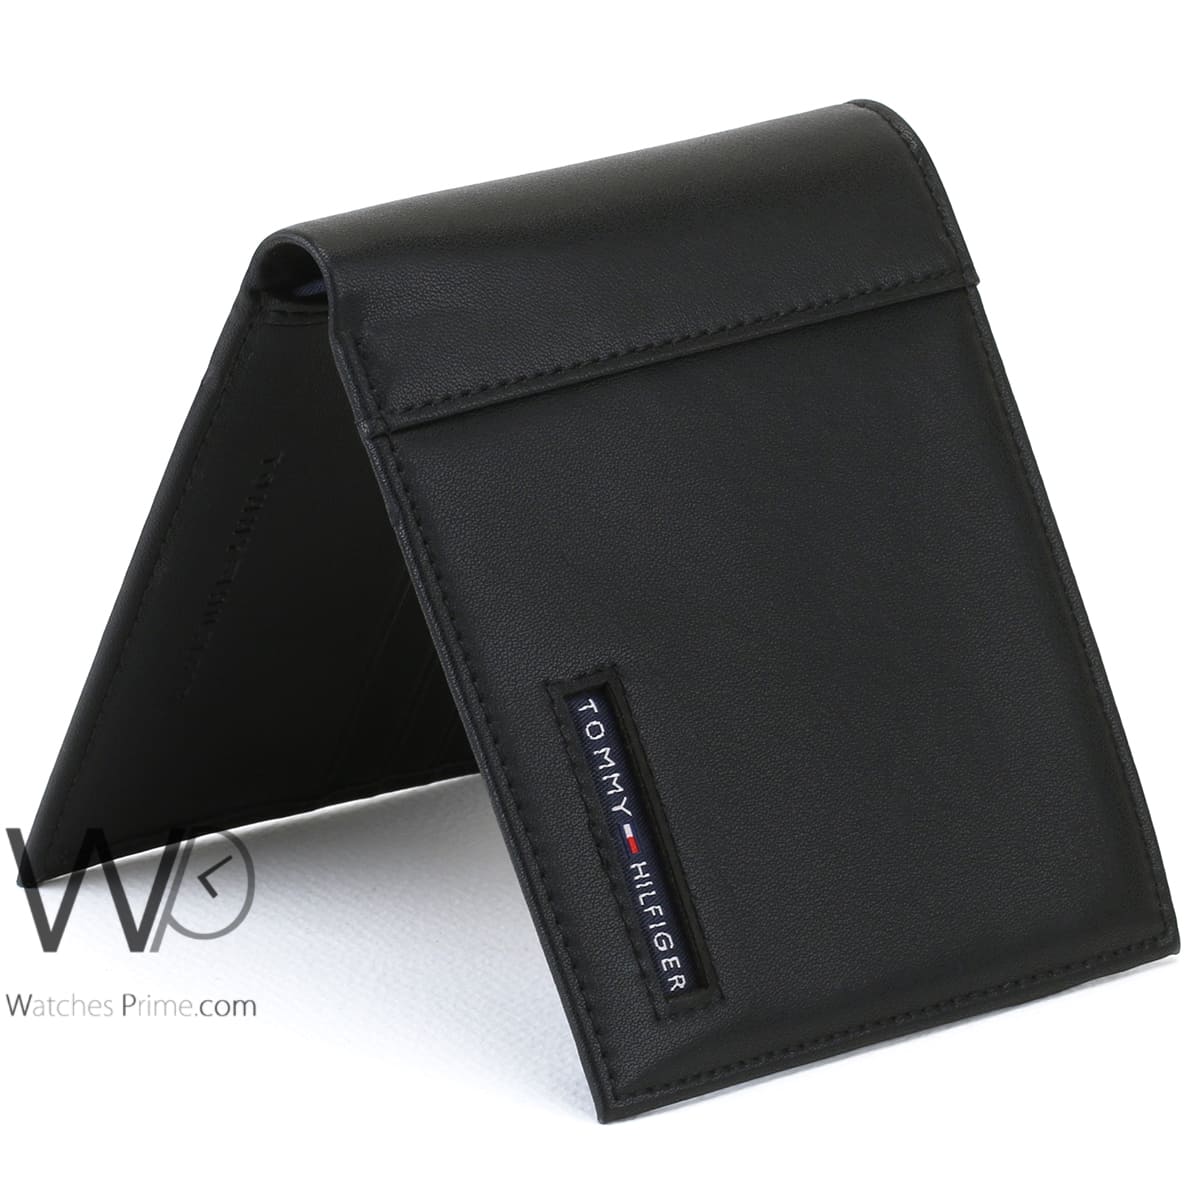 Tommy Wallet Genuine Leather Black For Men | Watches Prime